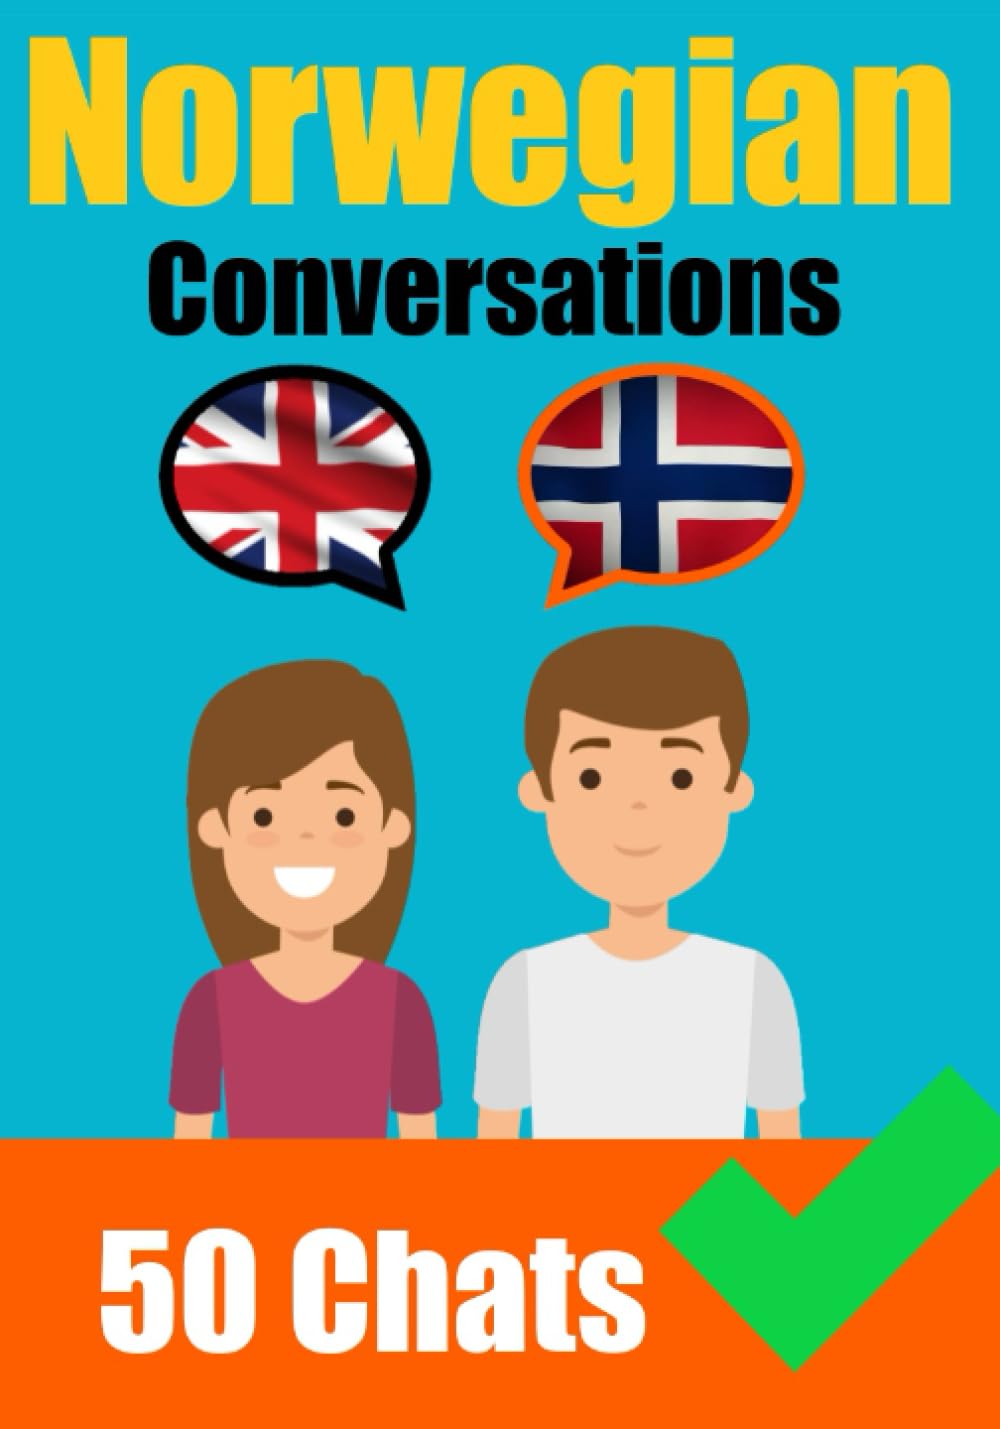 Conversations in Norwegian | English and Norwegian Conversations Side by Side